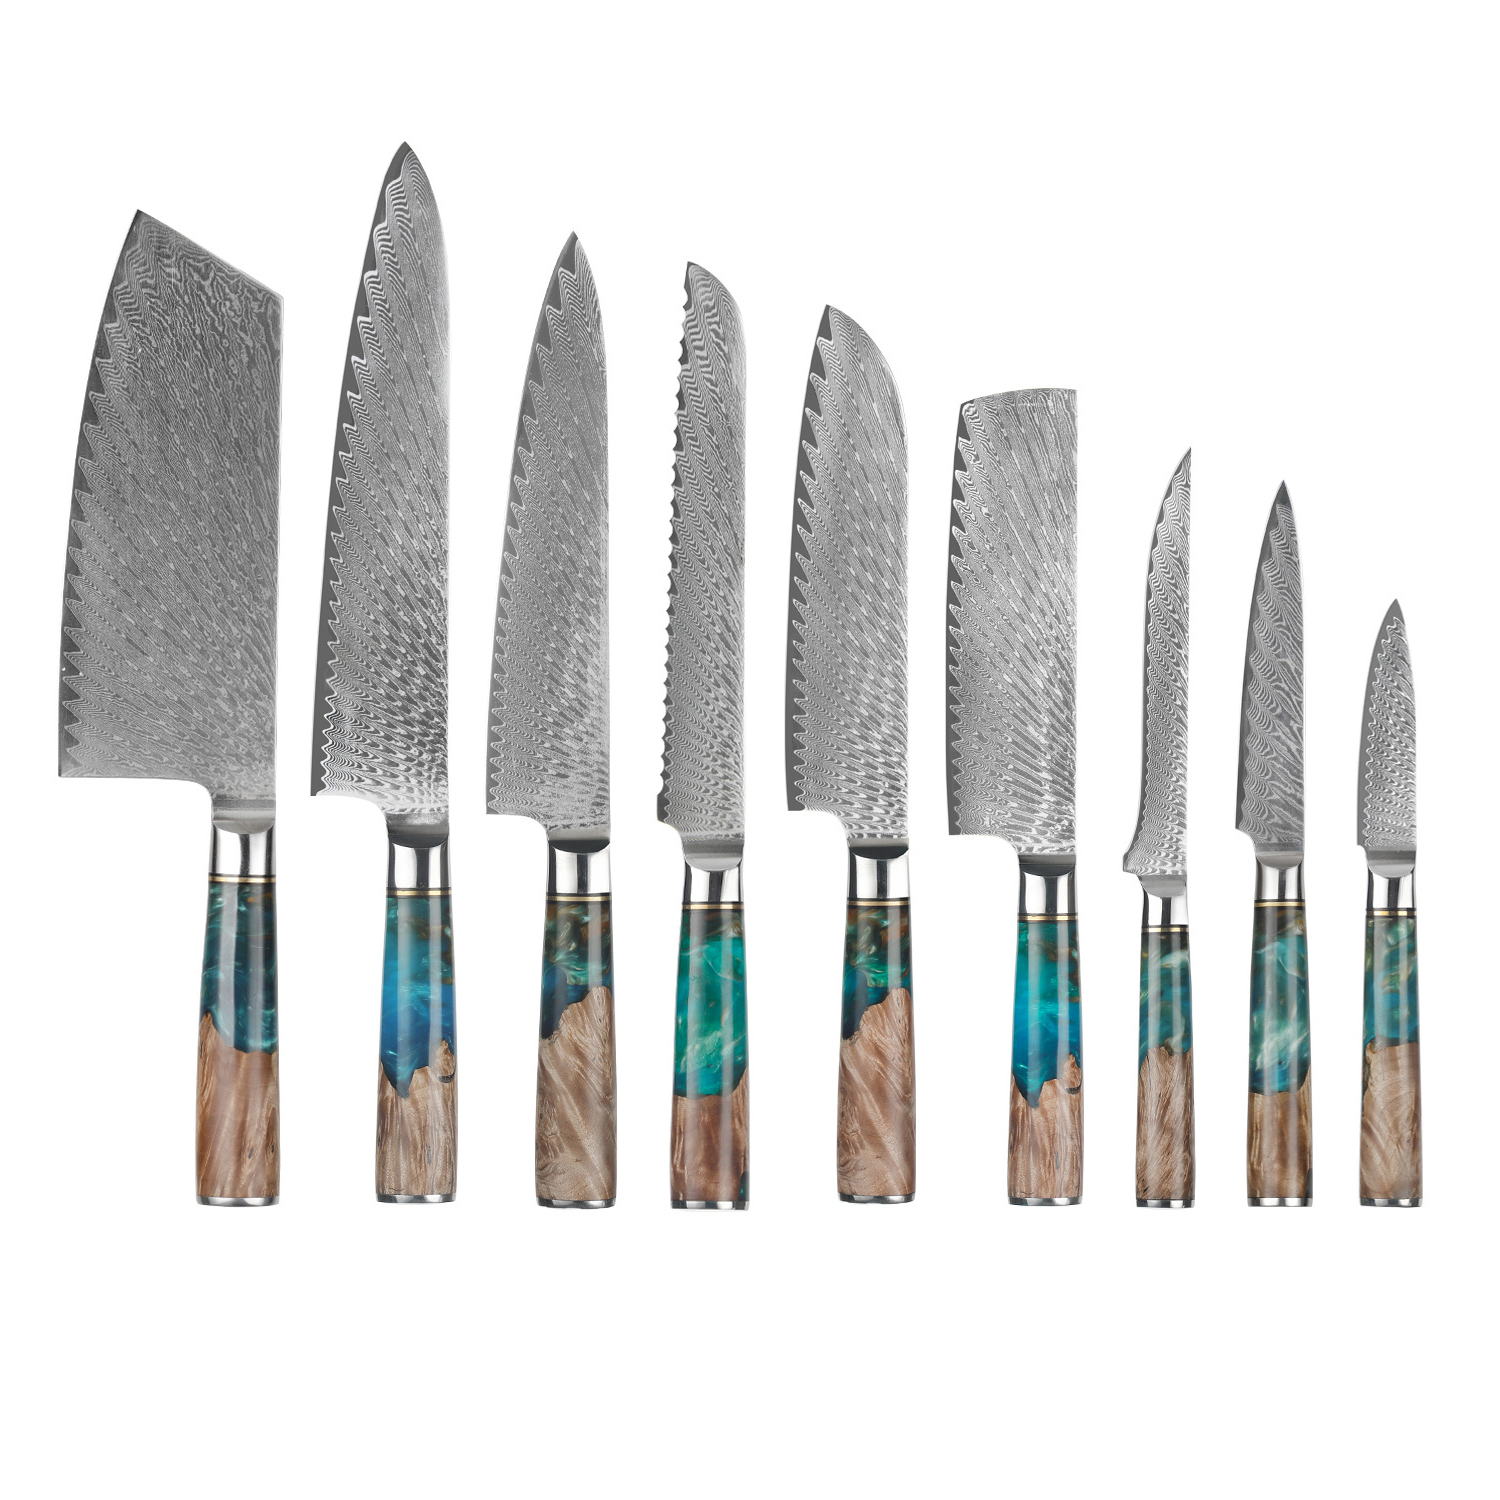 Resin 9 Piece Knife Set in Green displayed, showcasing its exquisite green Resin Wooden Handles and high-quality VG-10 Japanese high carbon stainless steel blades.